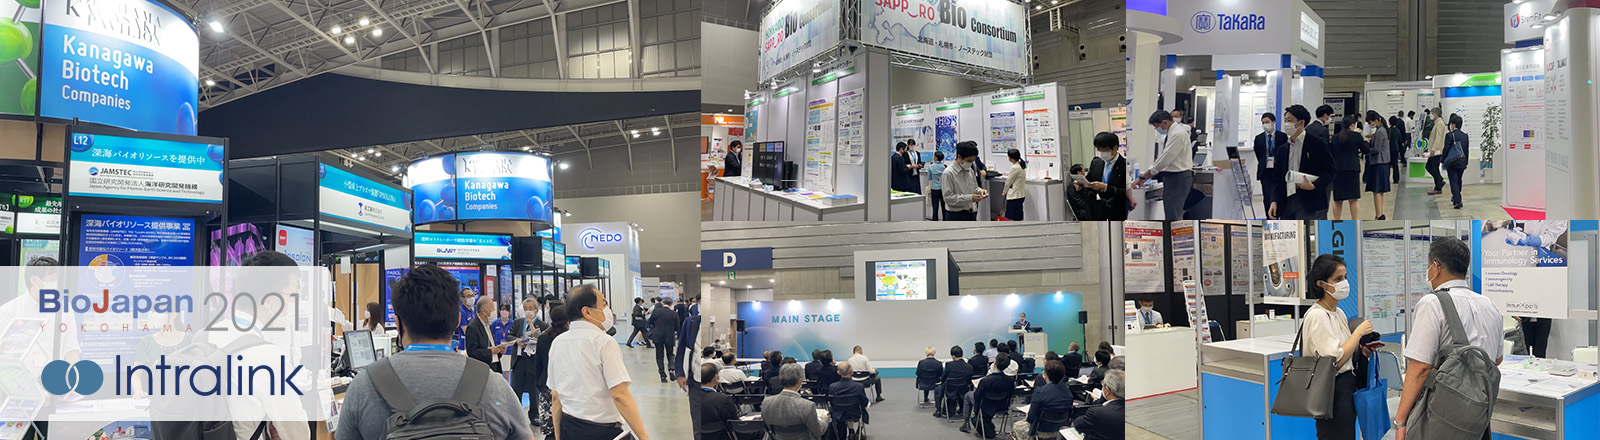 BioJapan 2021 – Views from Japan’s longest-running life science event